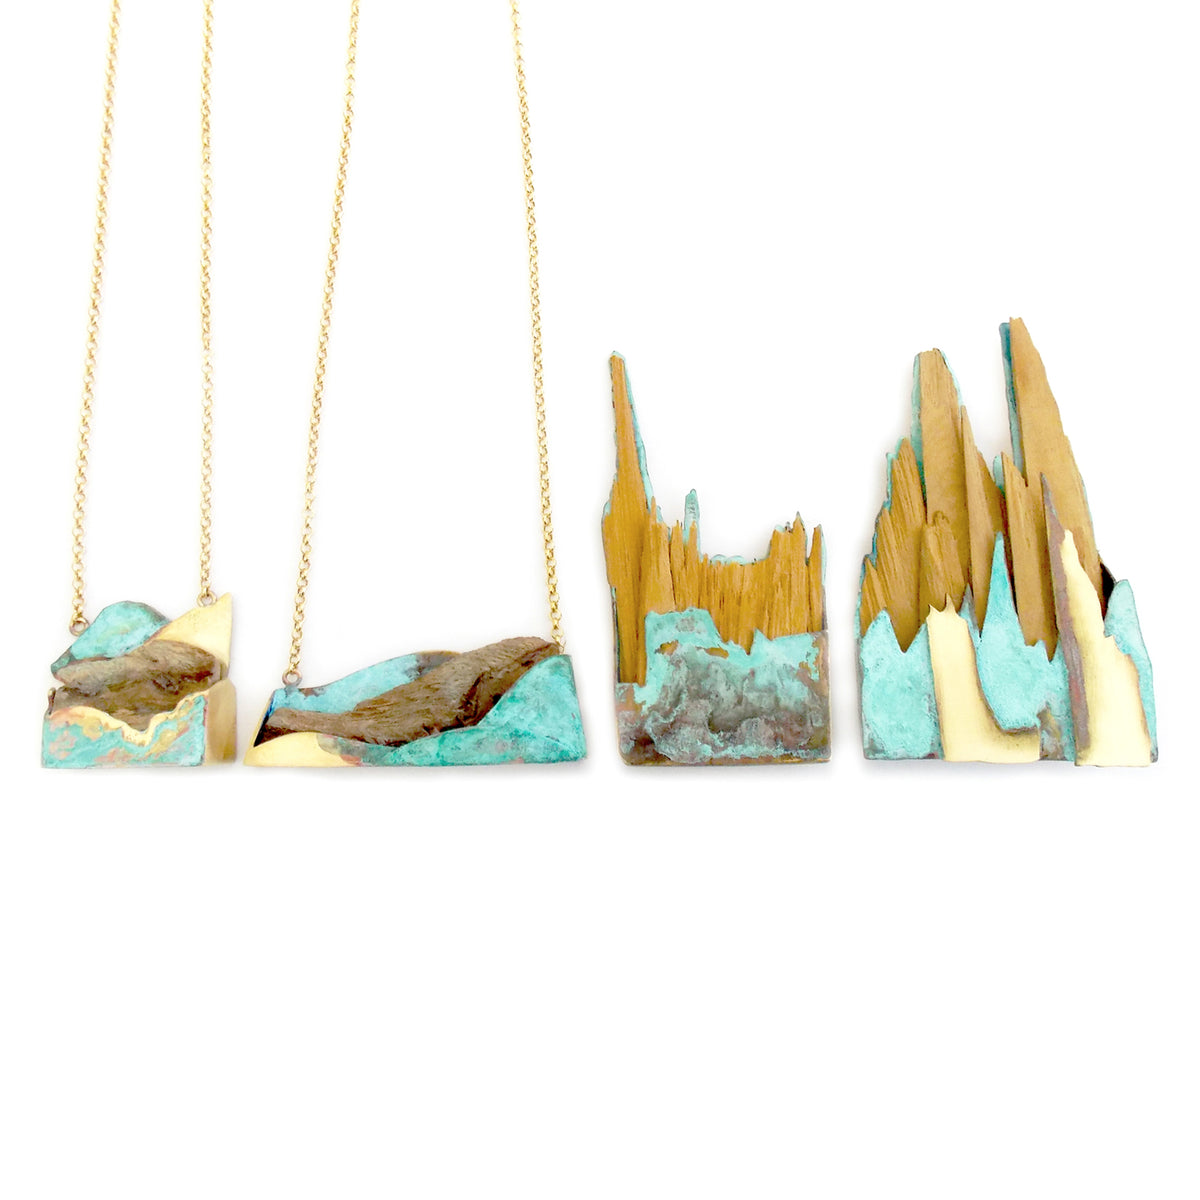 Imaginary mountain 5 - necklace with pendant